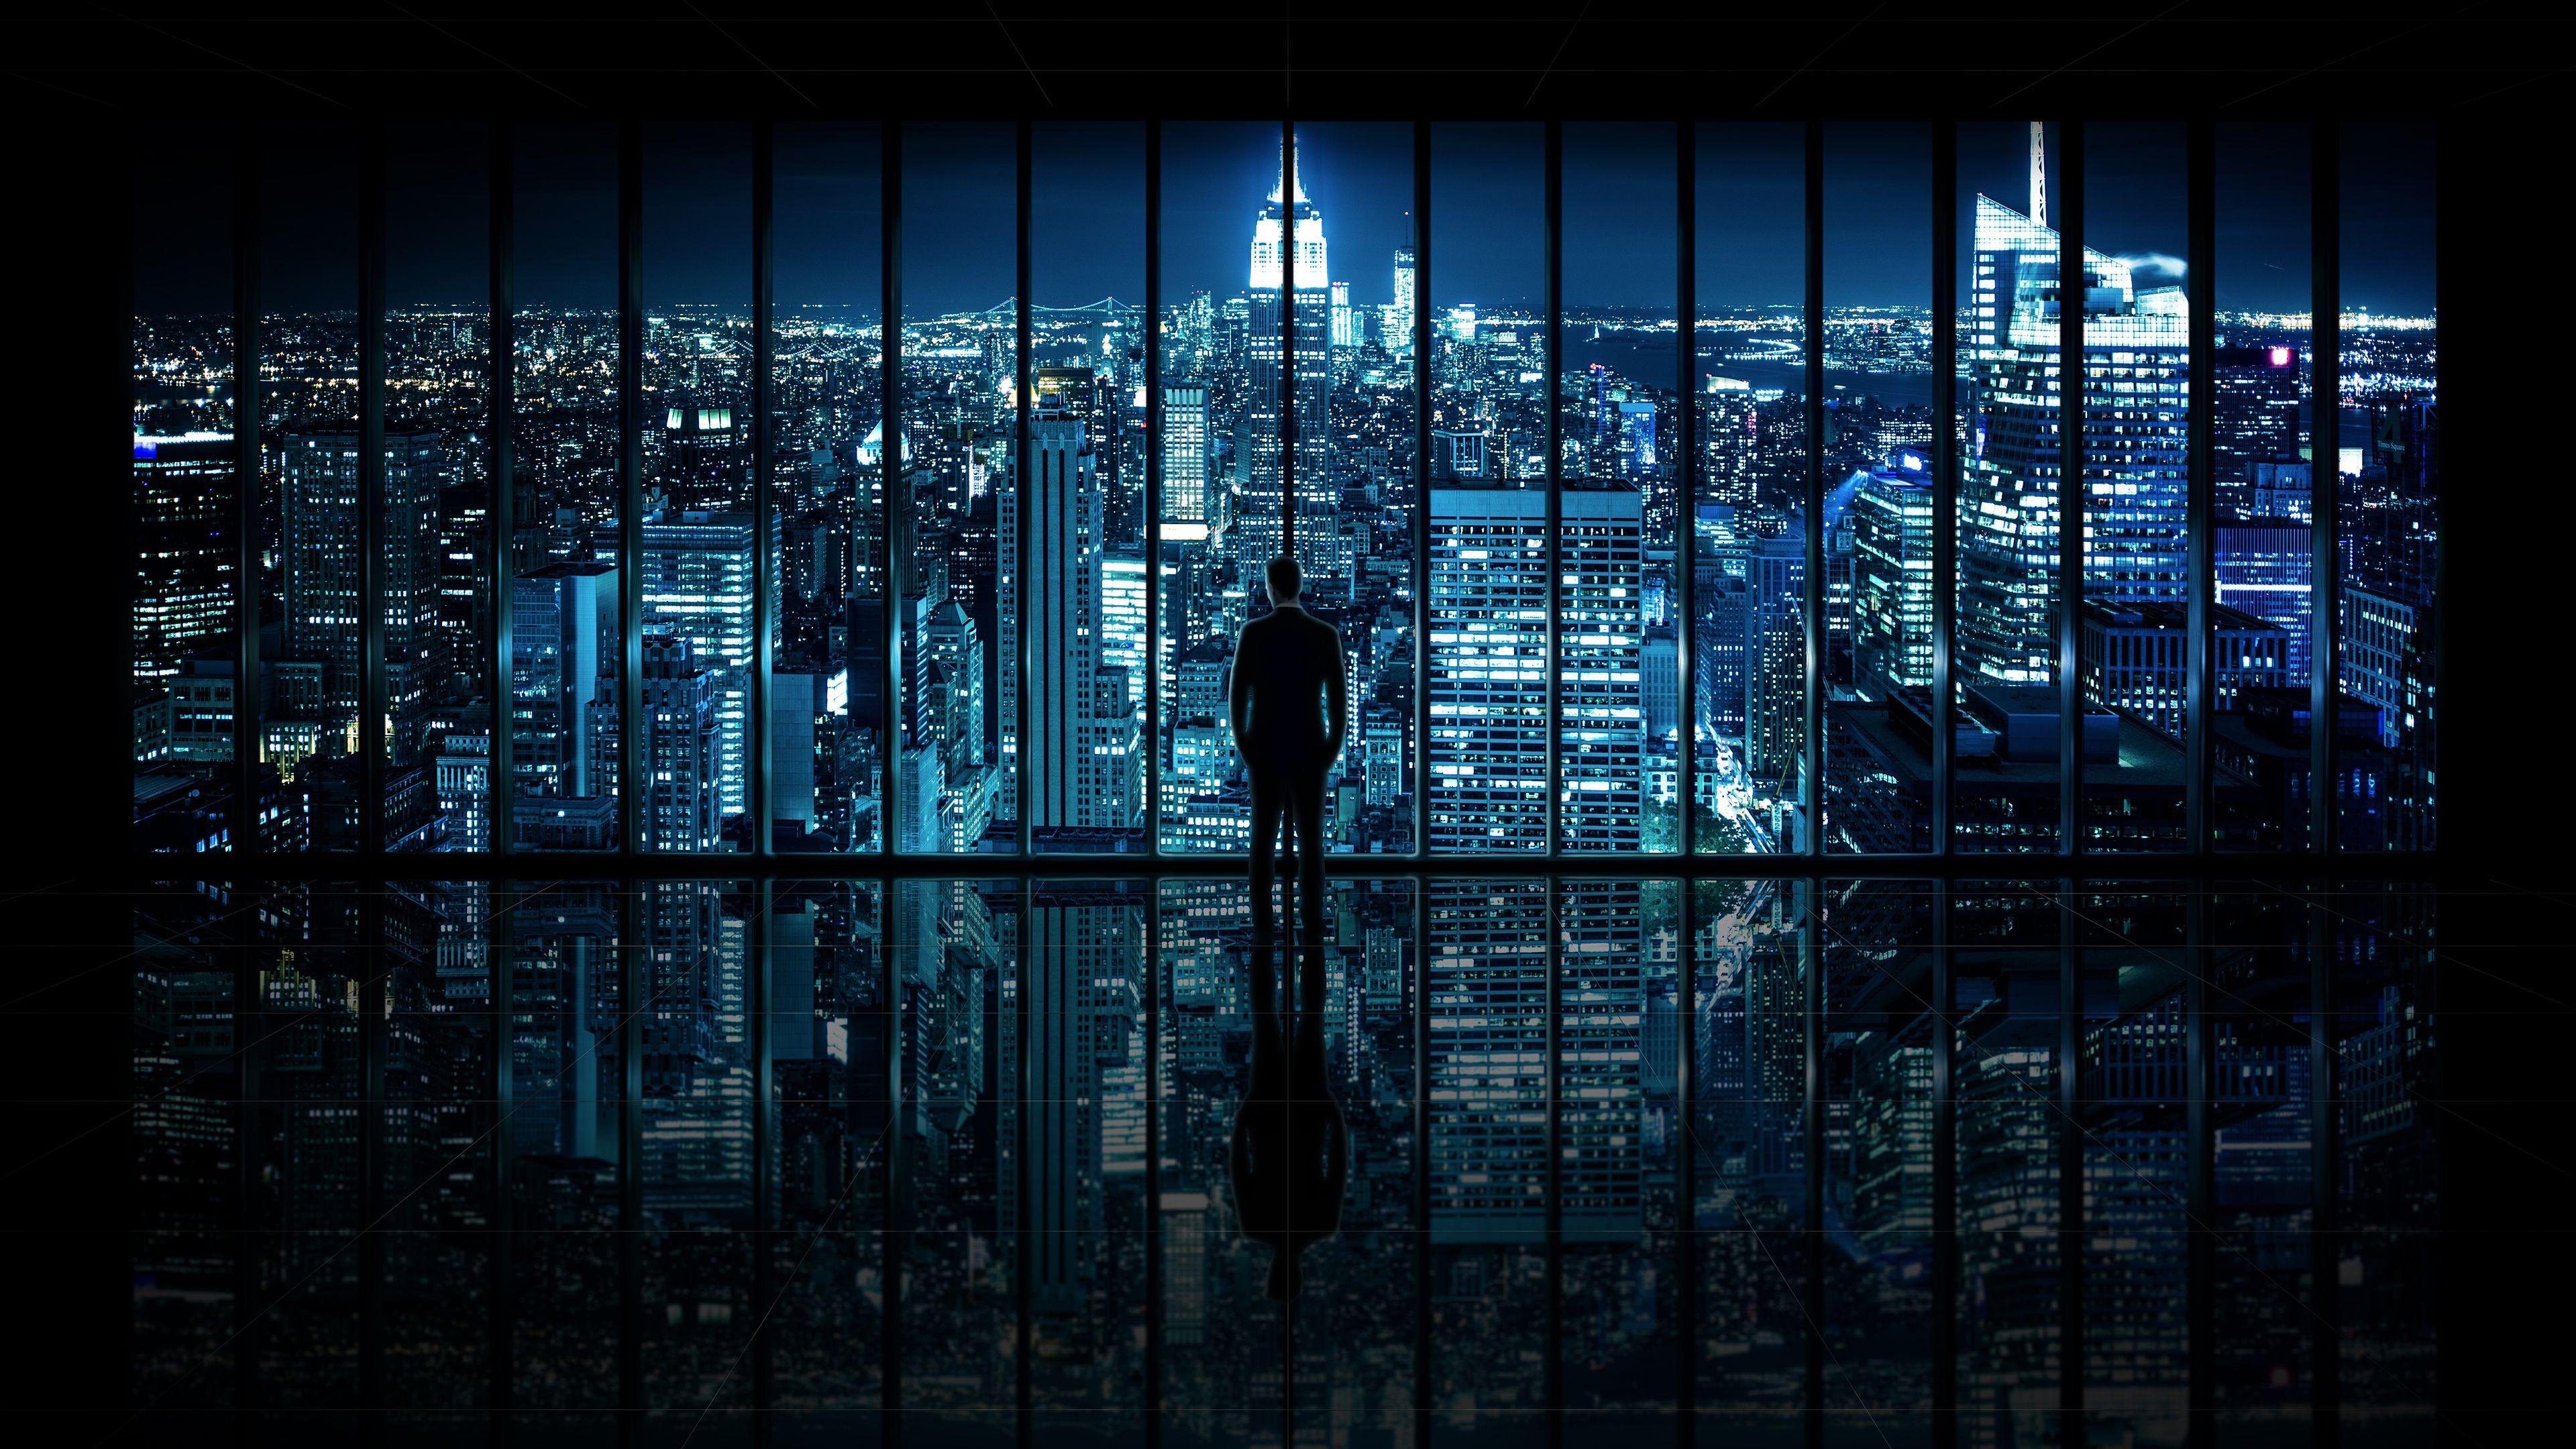 4k Gotham Wallpapers Top Free 4k Gotham Backgrounds Images, Photos, Reviews